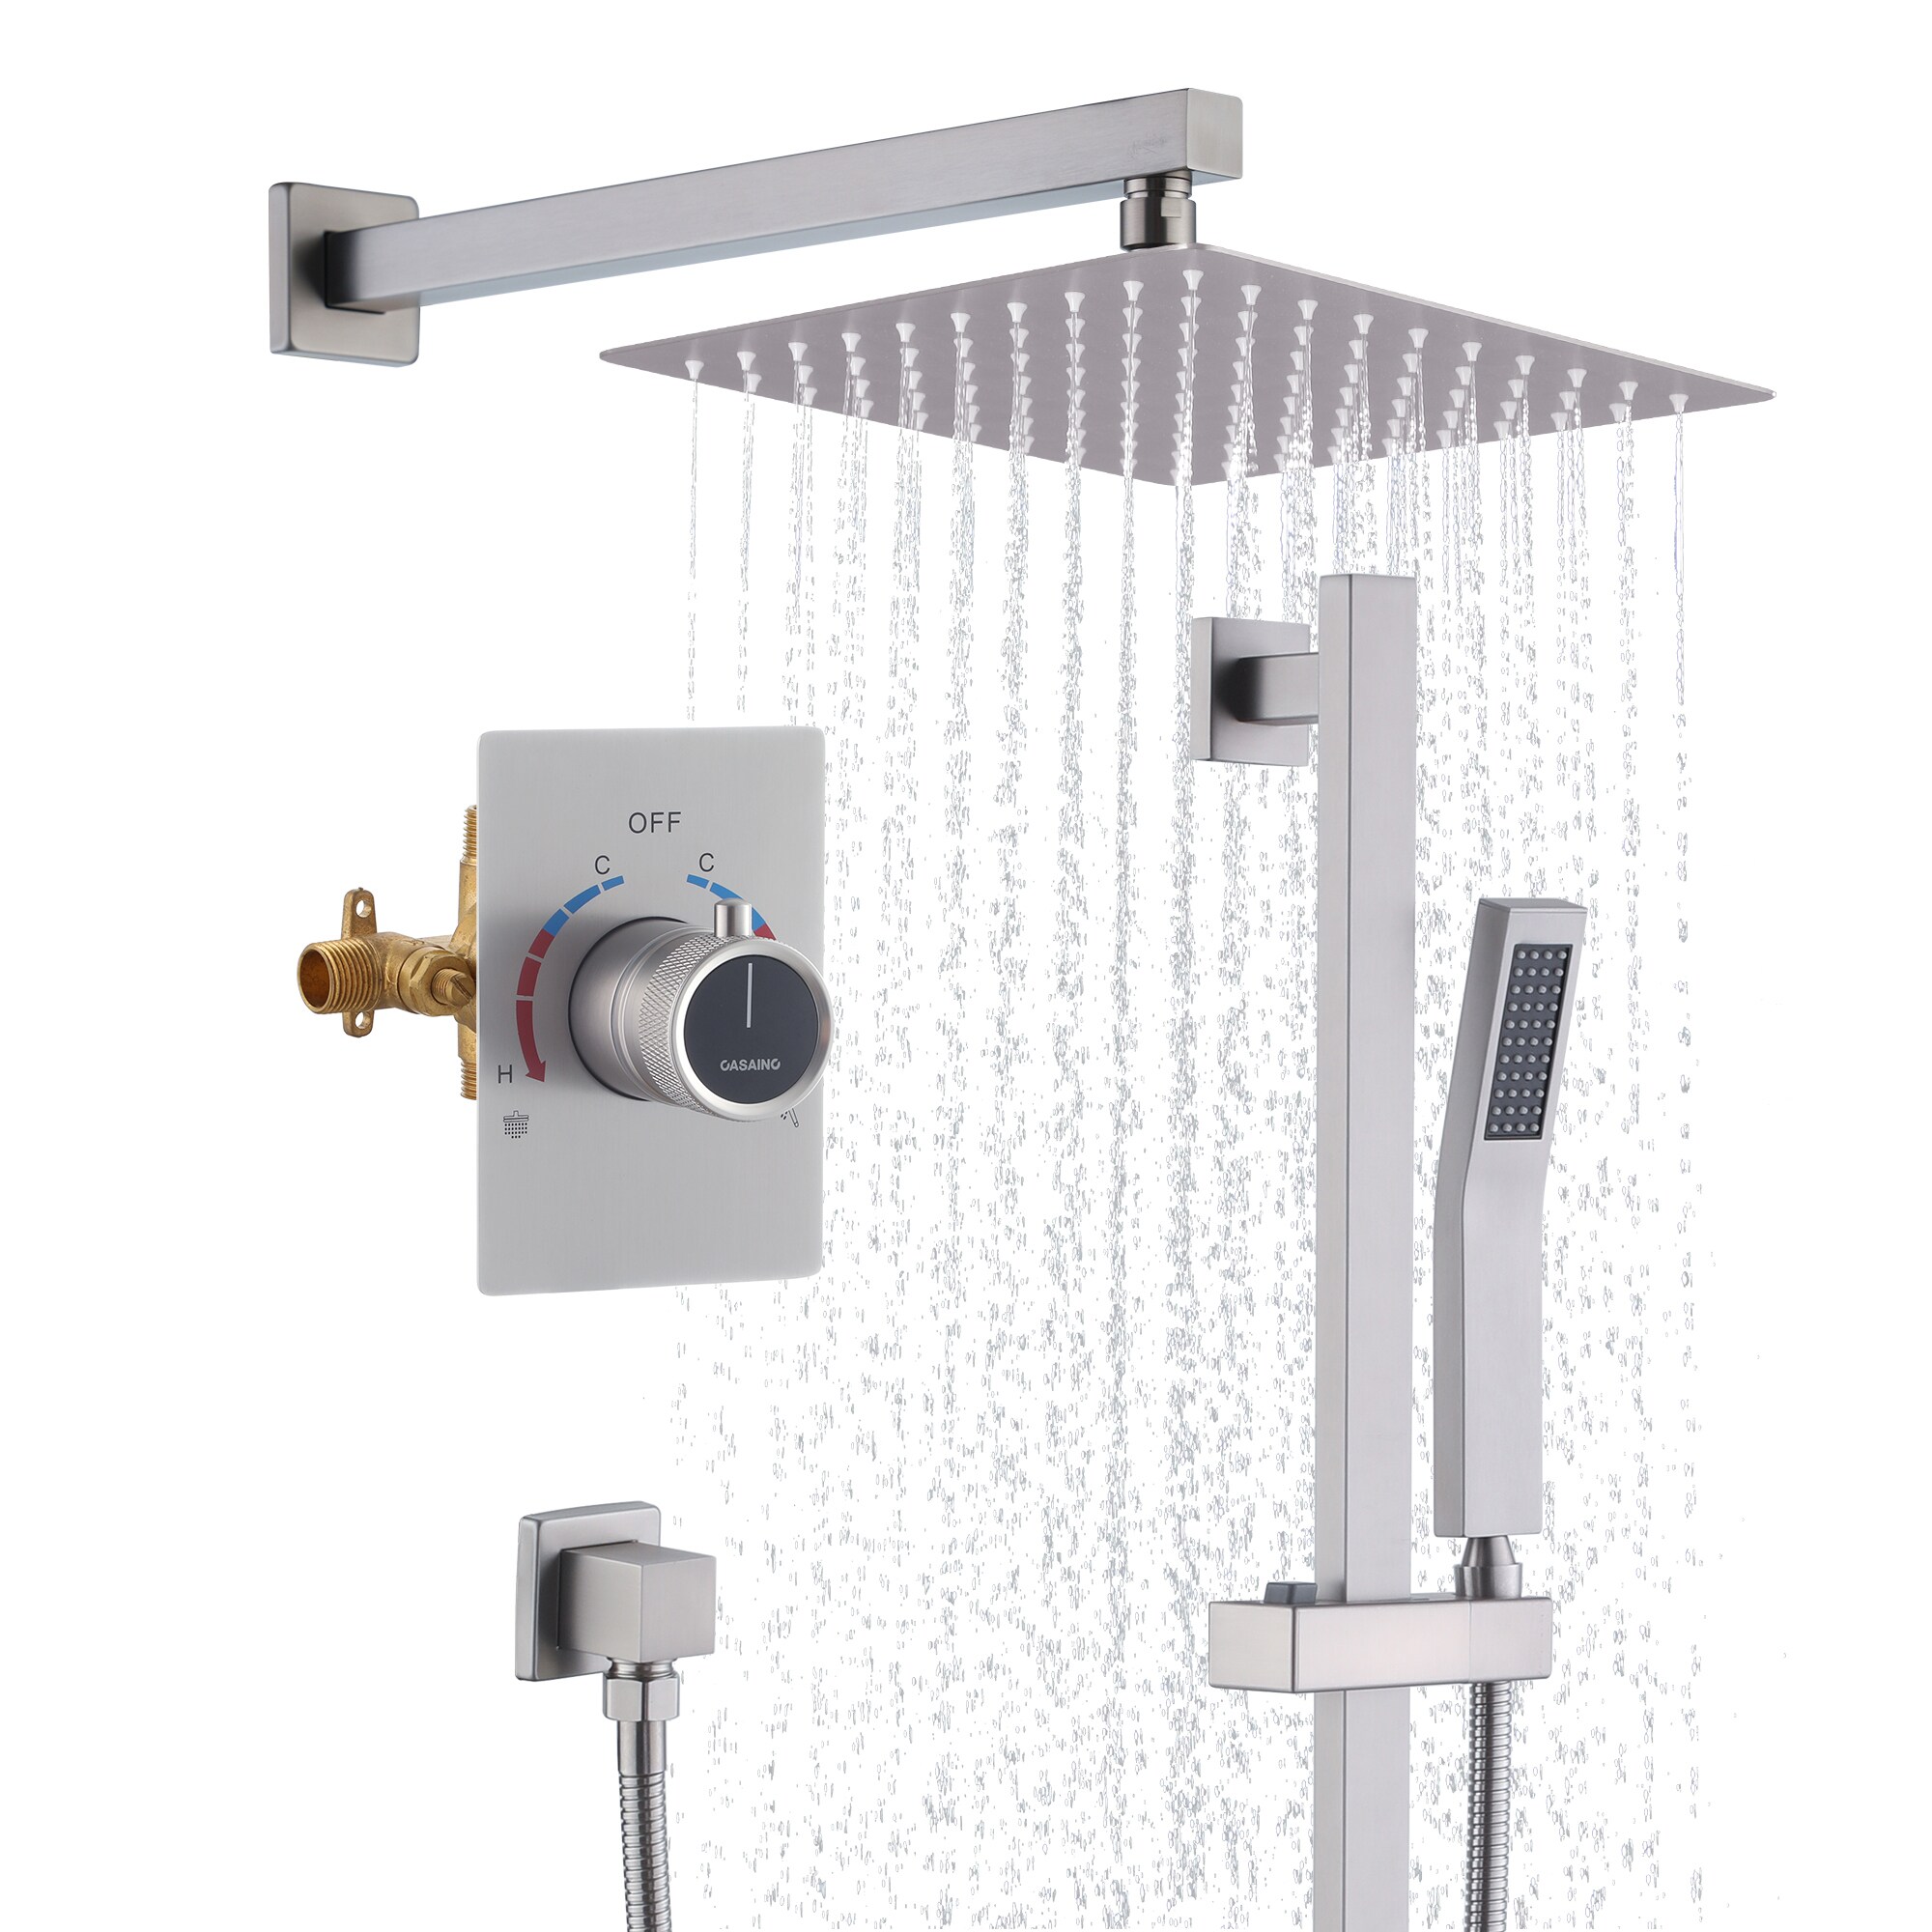 CASAINC Luxury Thermostatic Shower Faucet Brushed Nickel 1-handle ...